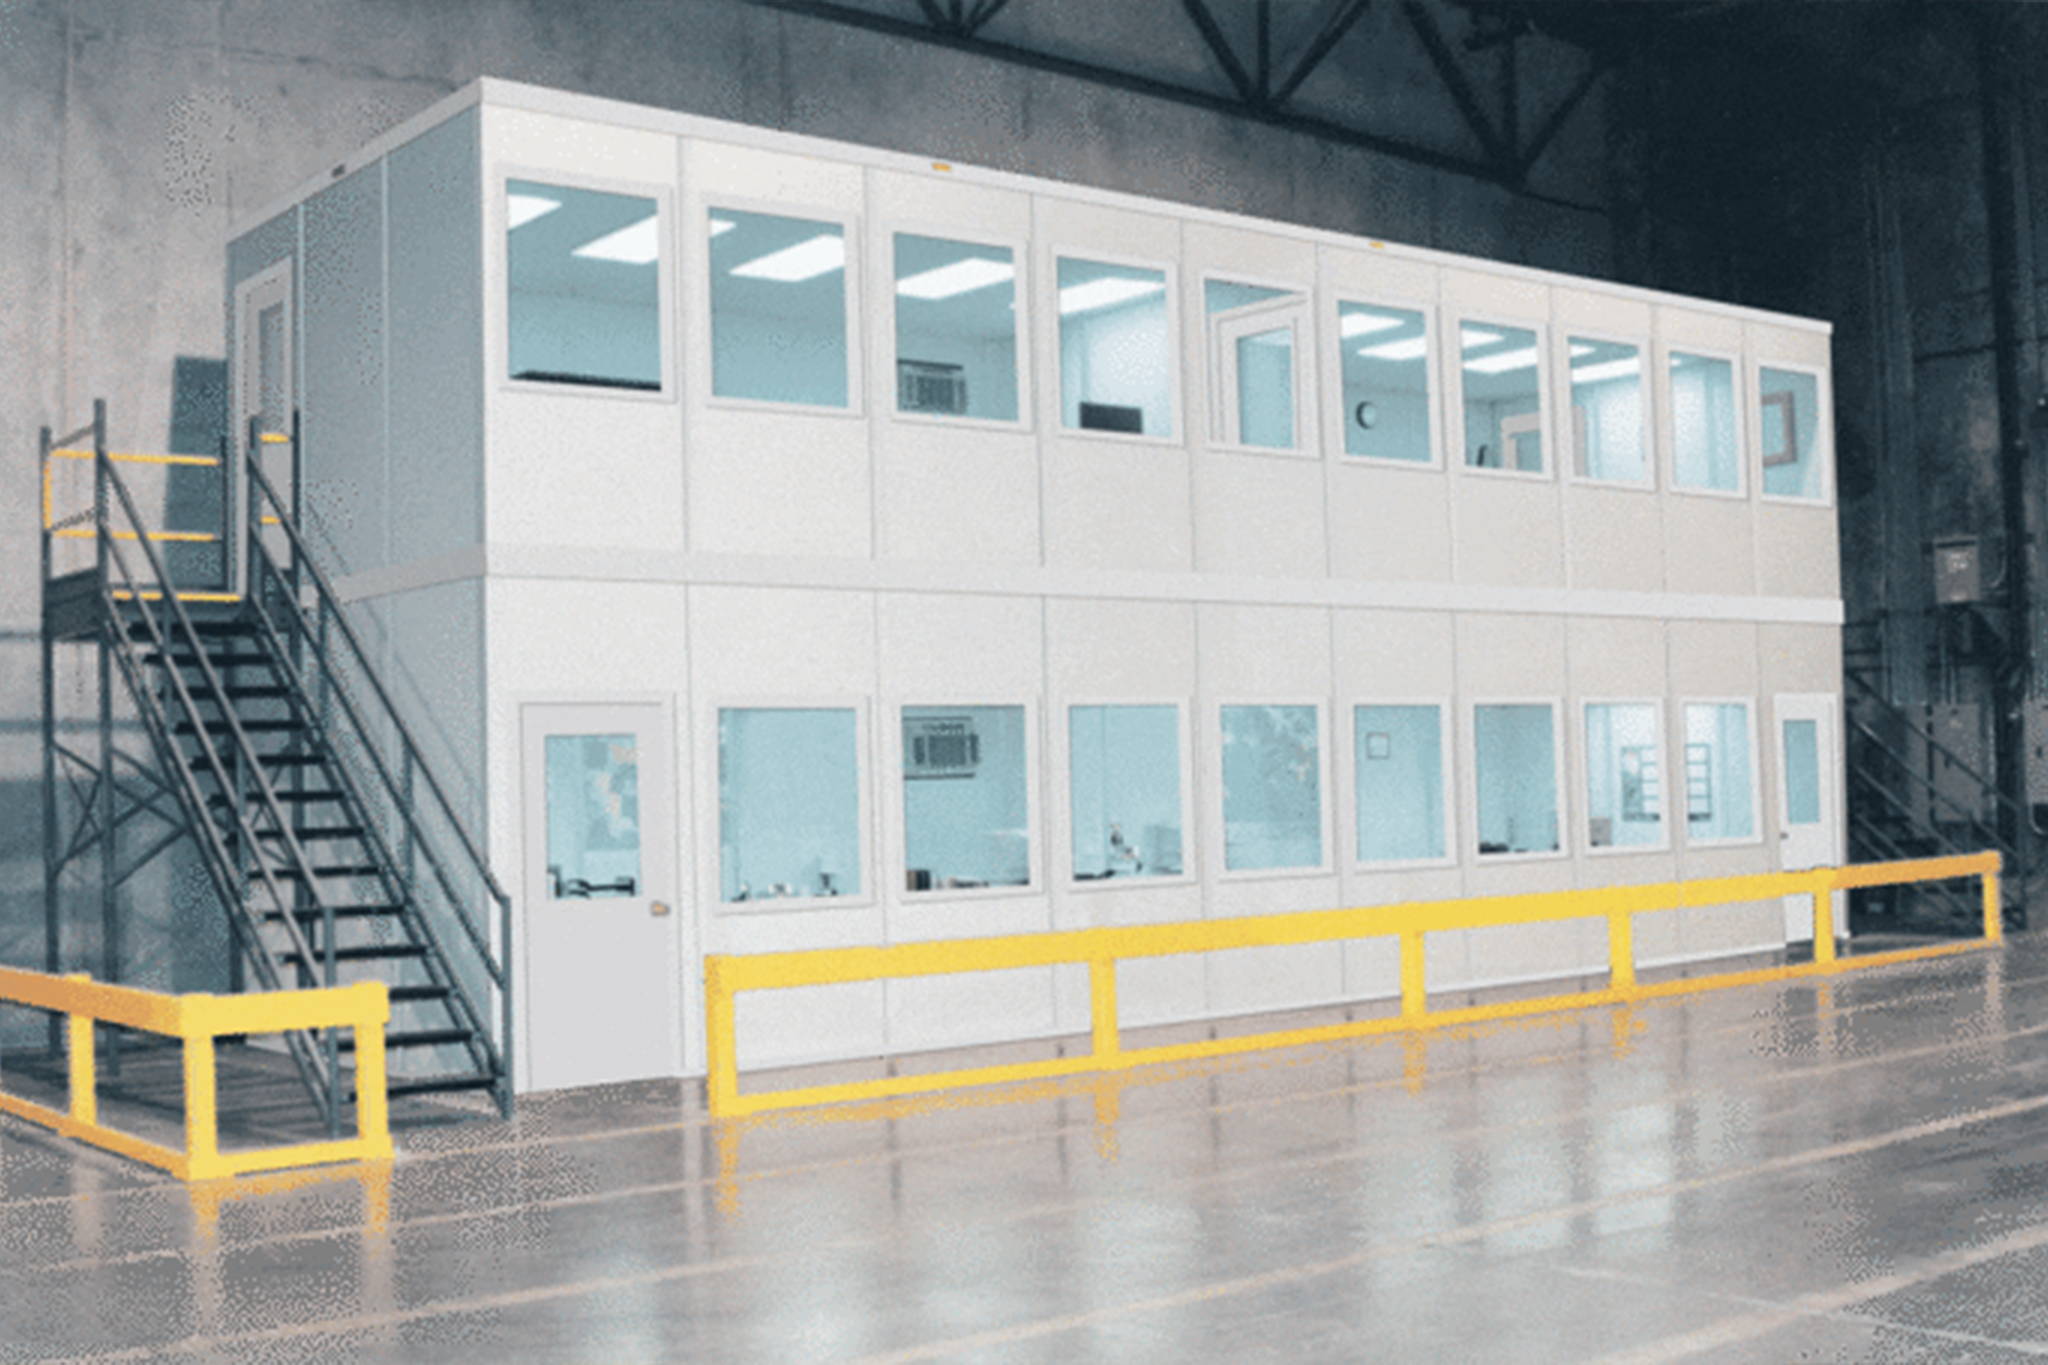 Two-story modular office installed in warehouse with mezzanine landing and stairs to access second floor office. Surrounded by yellow steel guard rails.